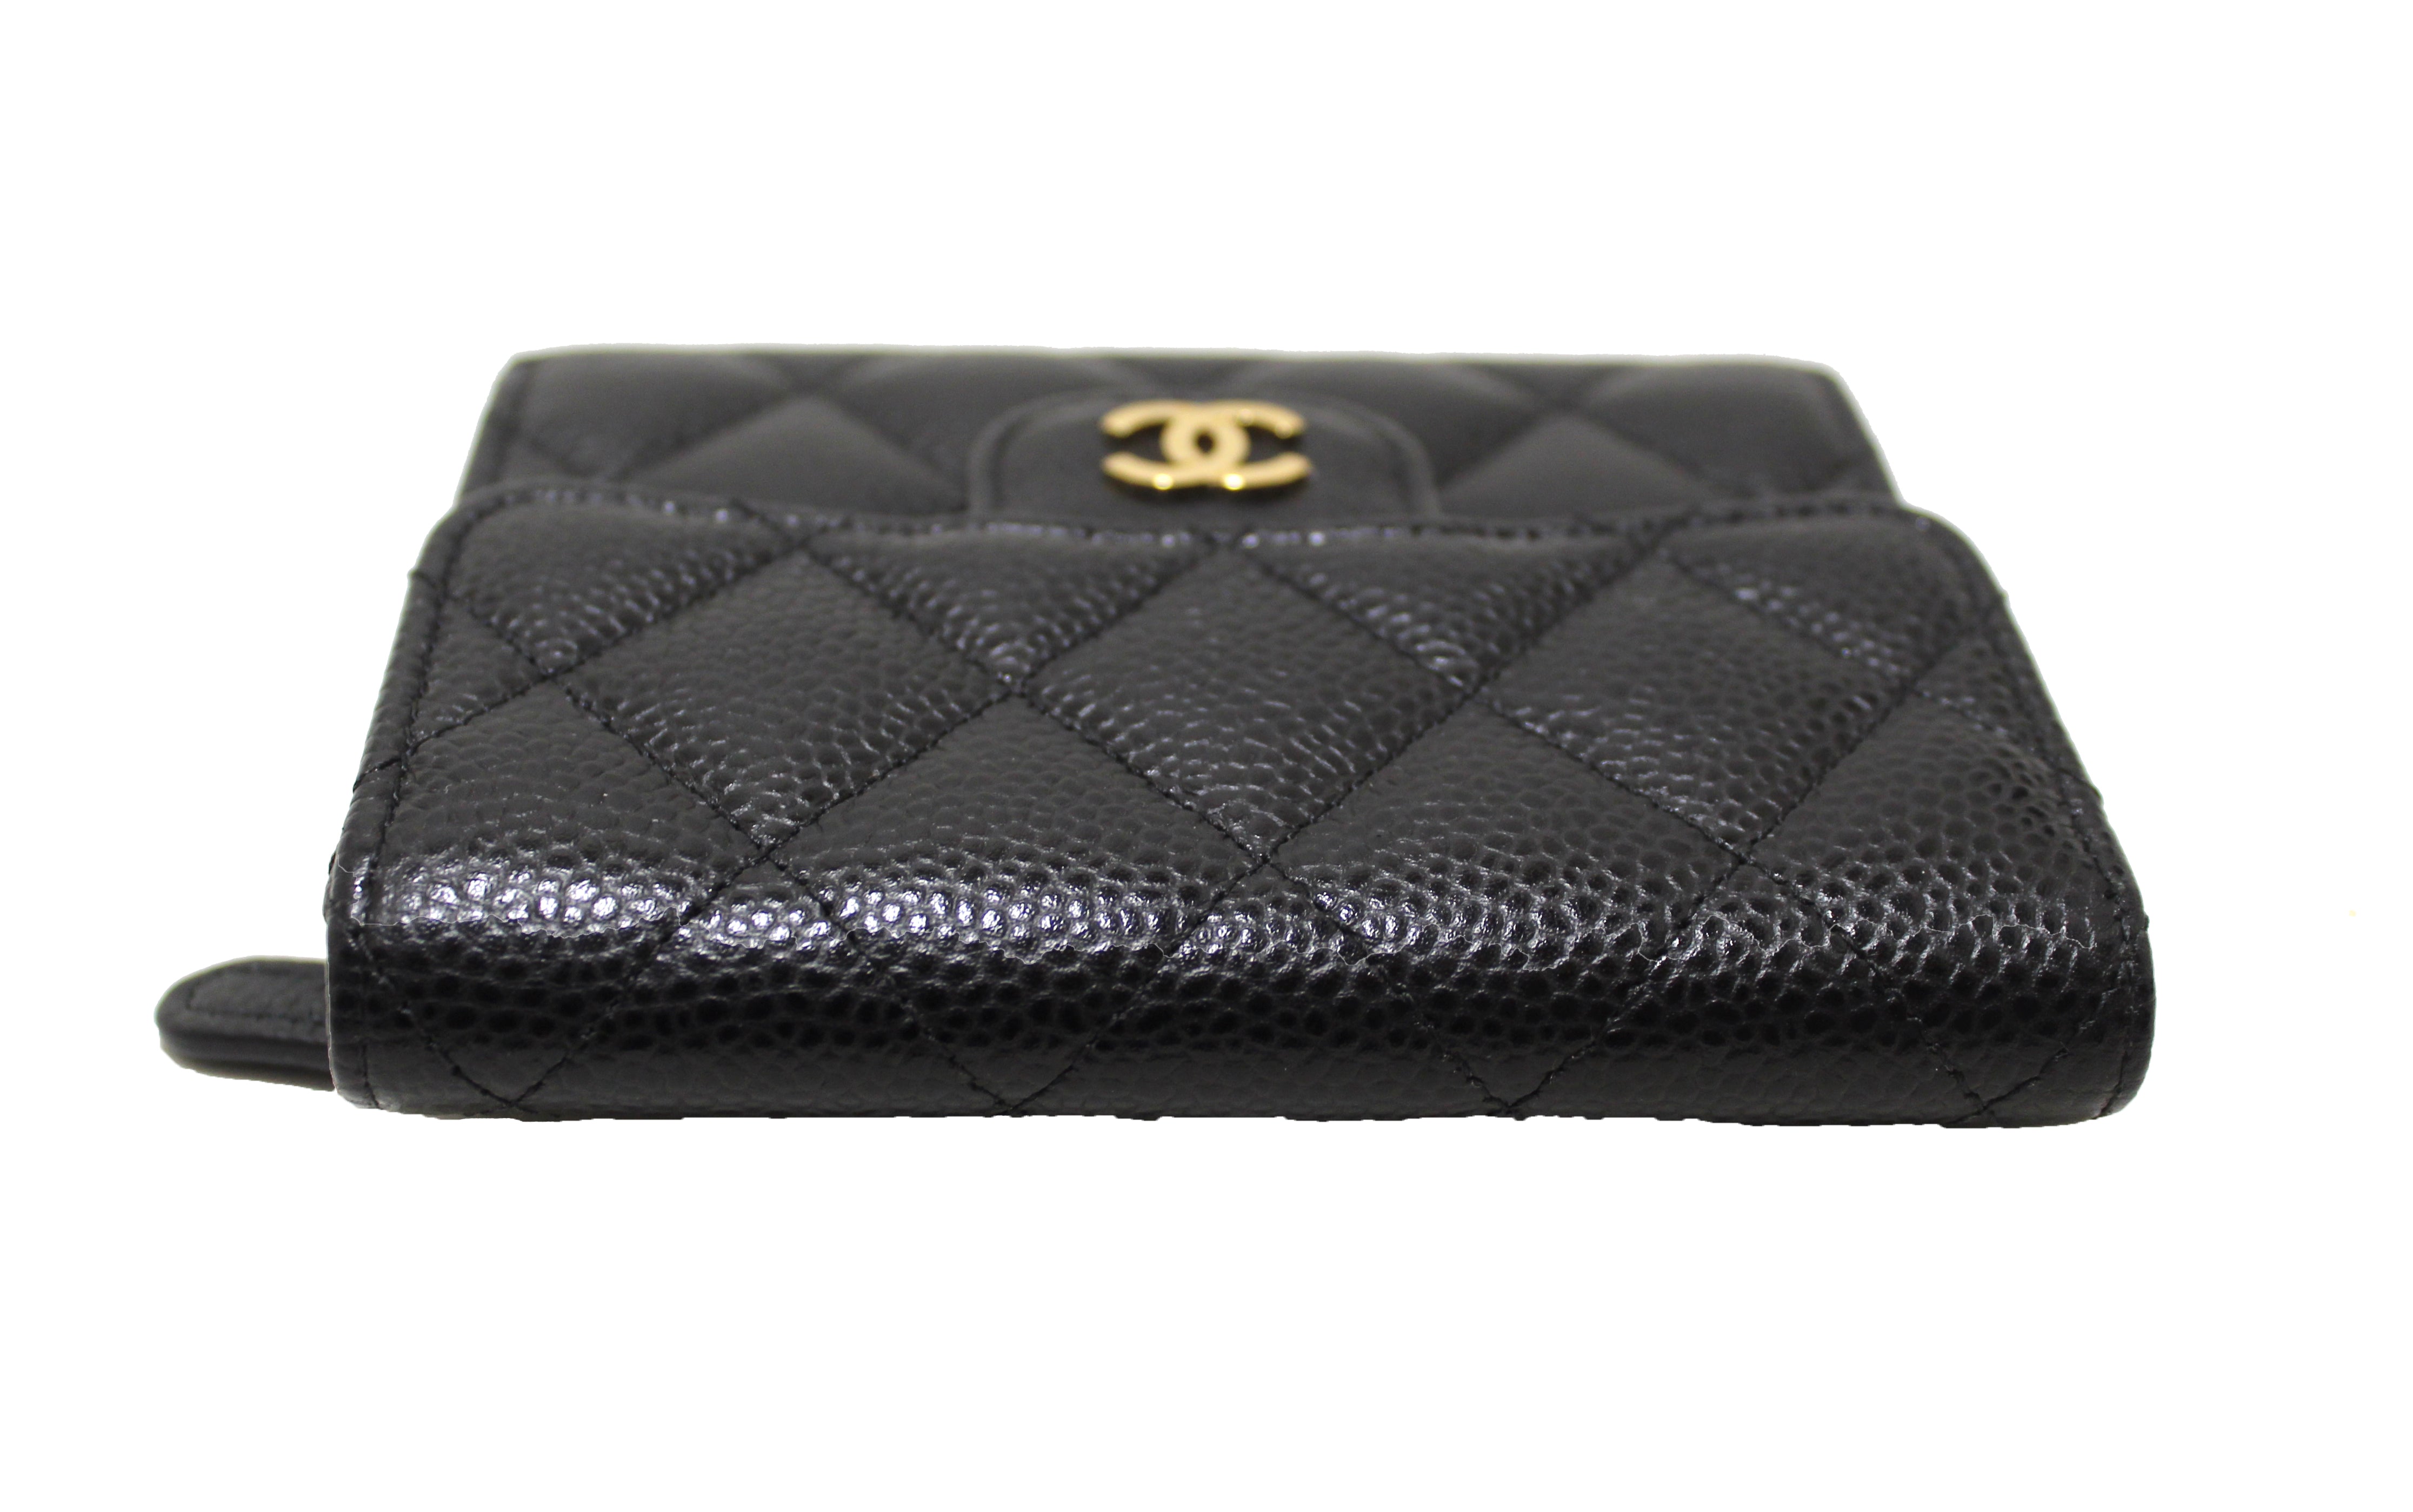 Authentic Chanel Black Quilted Caviar Leather Classic Small Flap